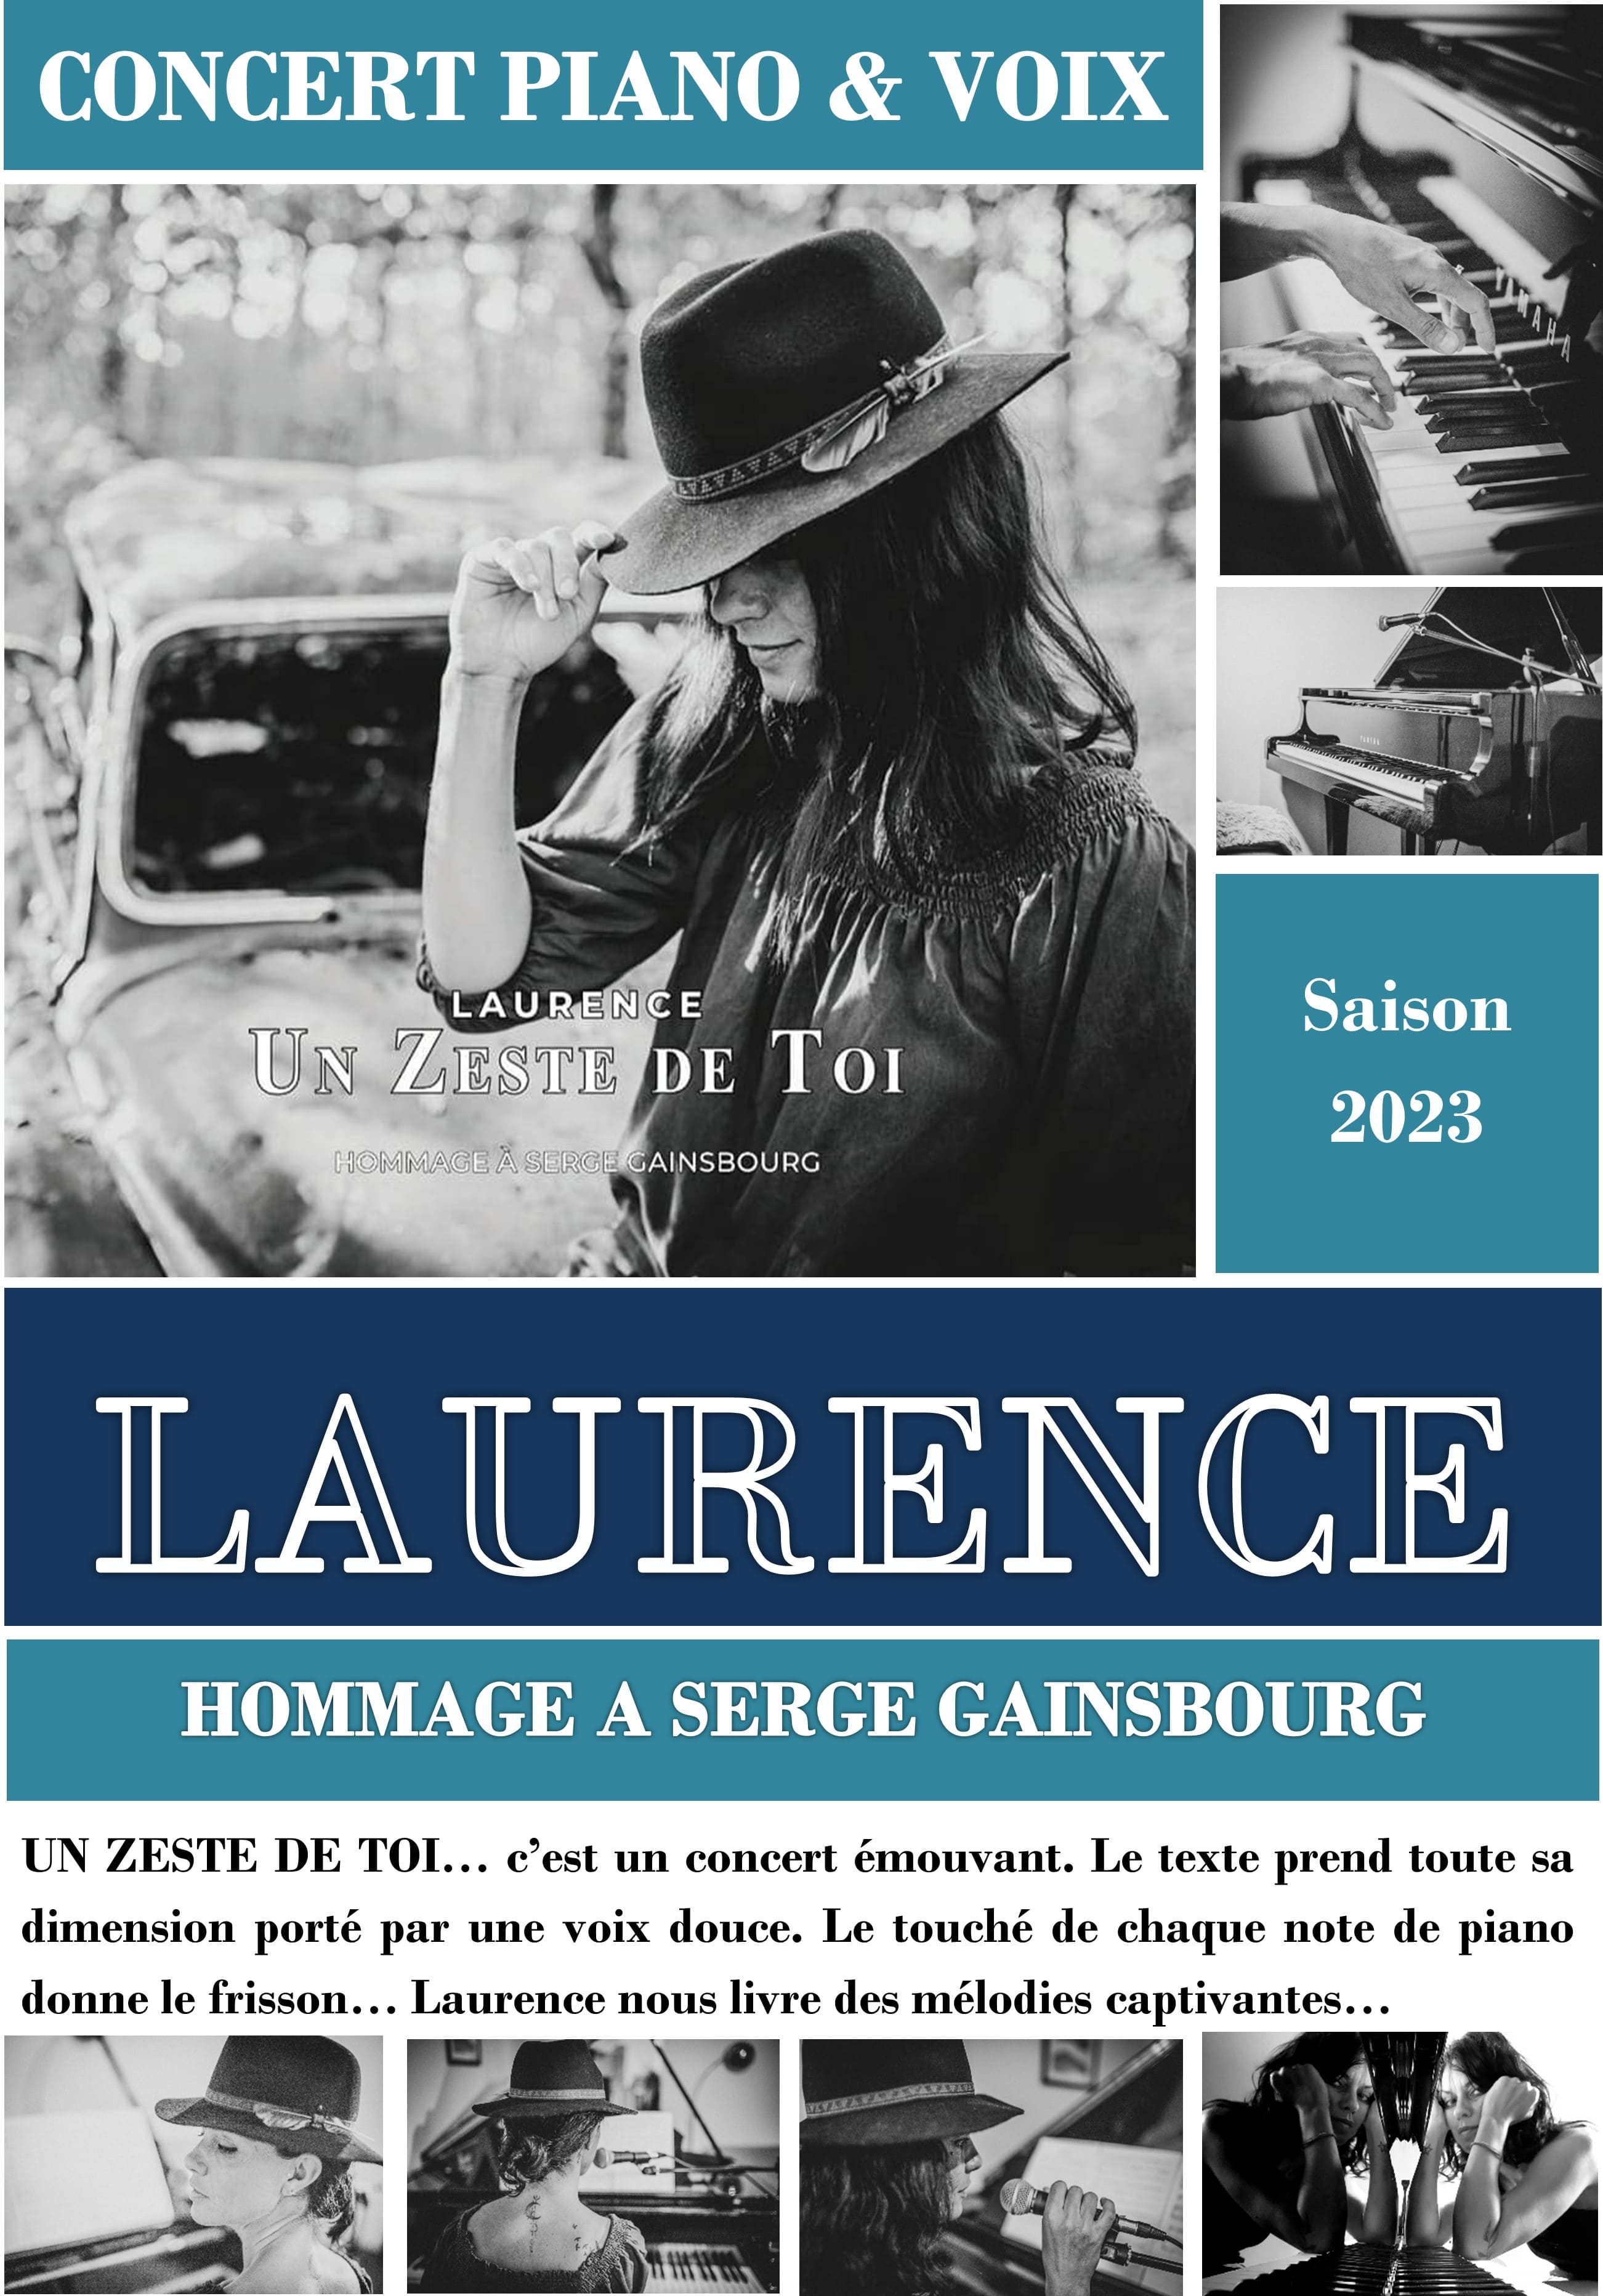 Laurence chante gainsbourg 